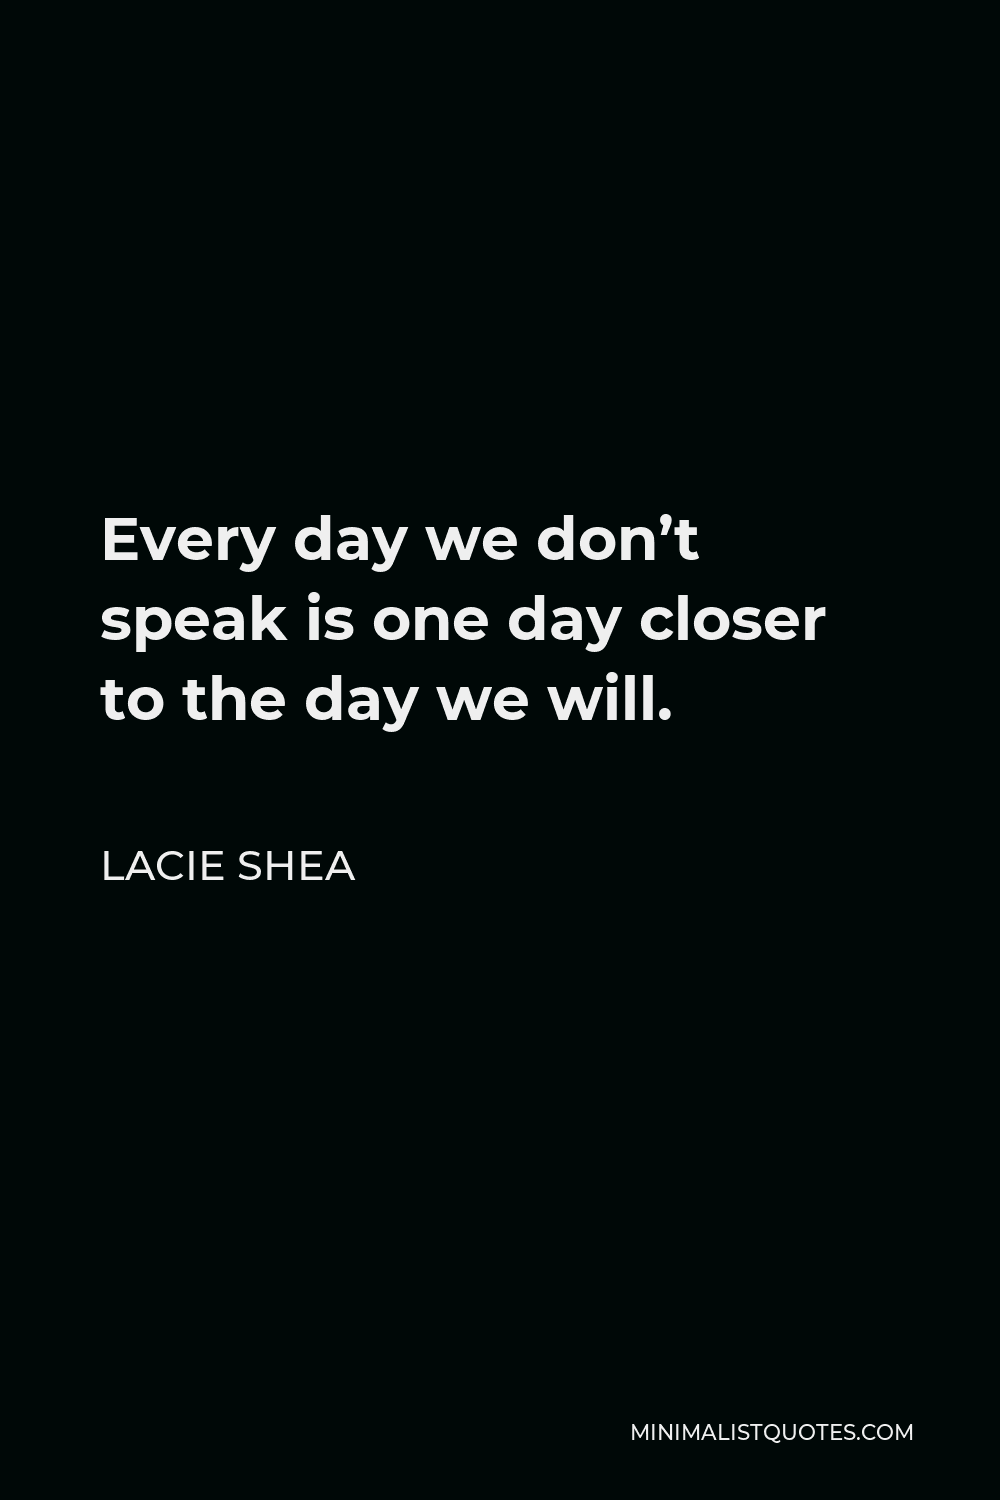 Lacie Shea Quote - Every day we don’t speak is one day closer to the day we will.